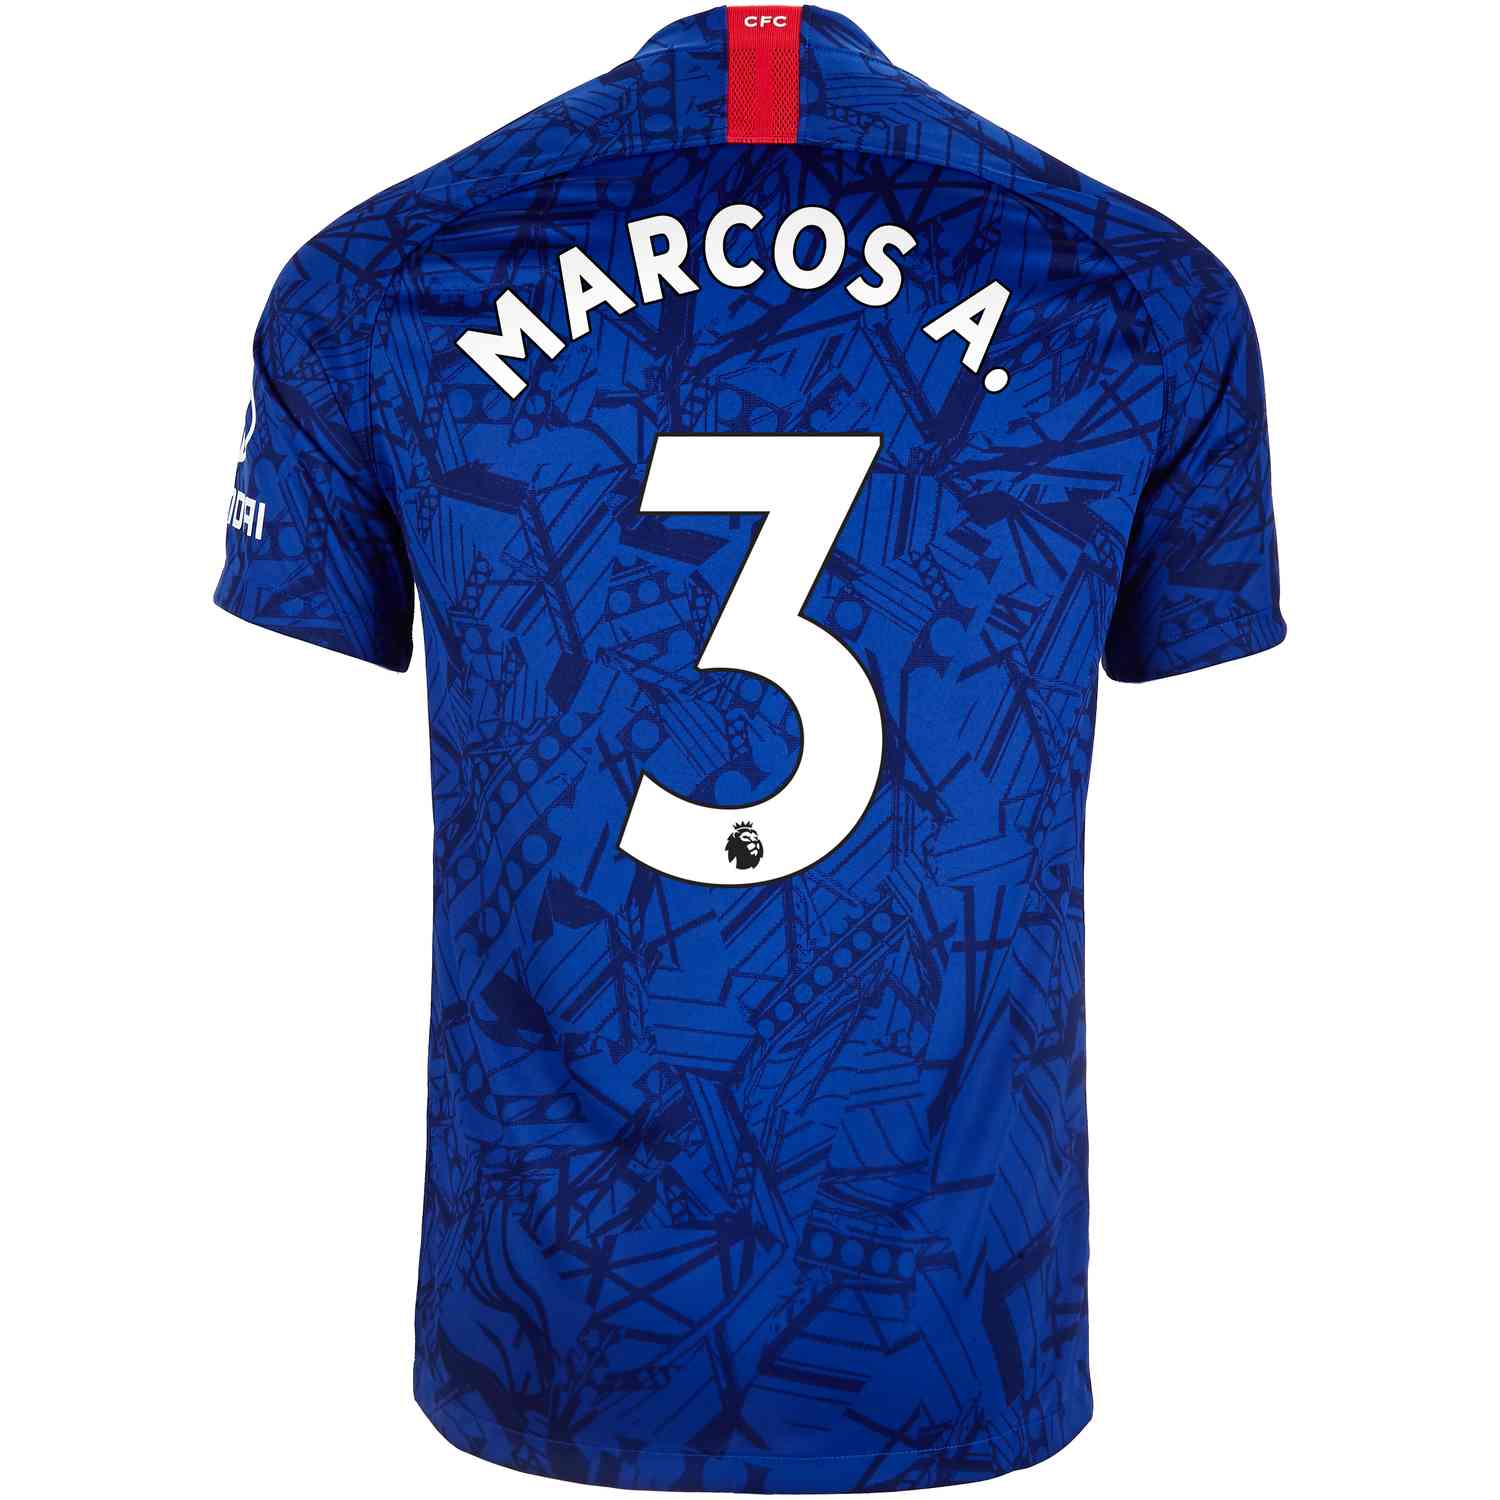 2019/20 Marcos Alonso Chelsea Home Jersey - Soccer Master